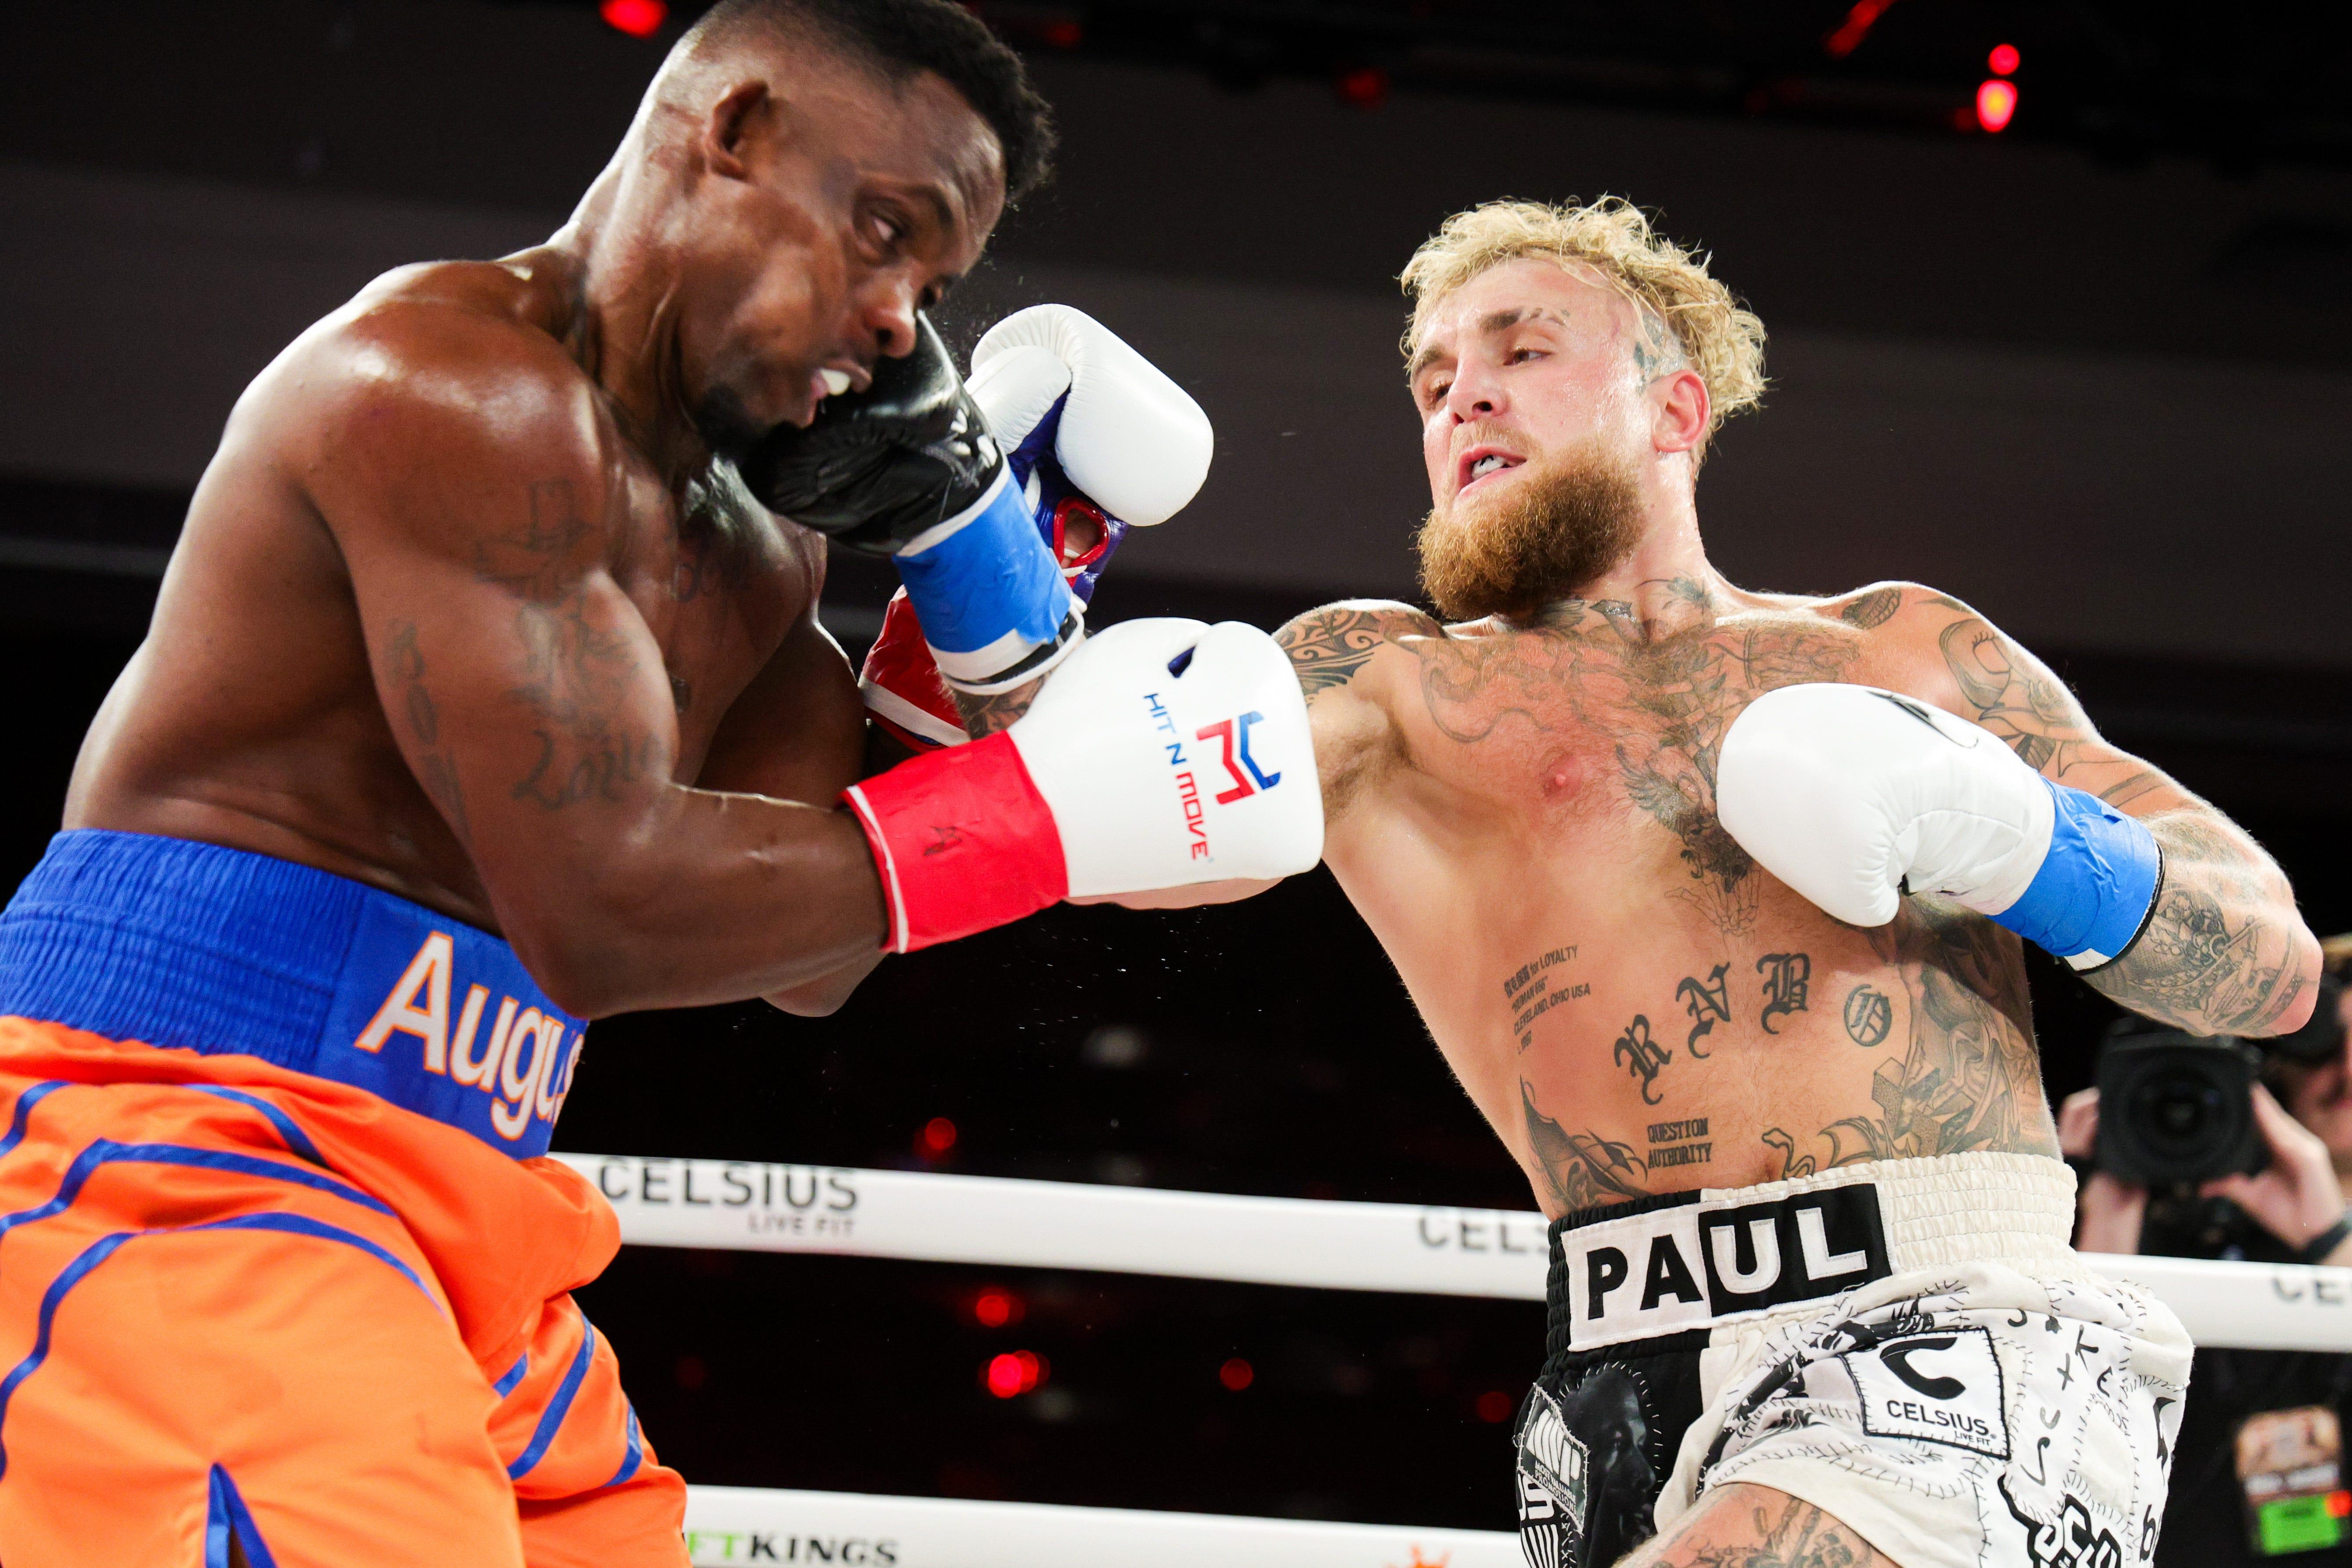 Jake Paul knocked out Andre August in the first round of their Friday night fight.